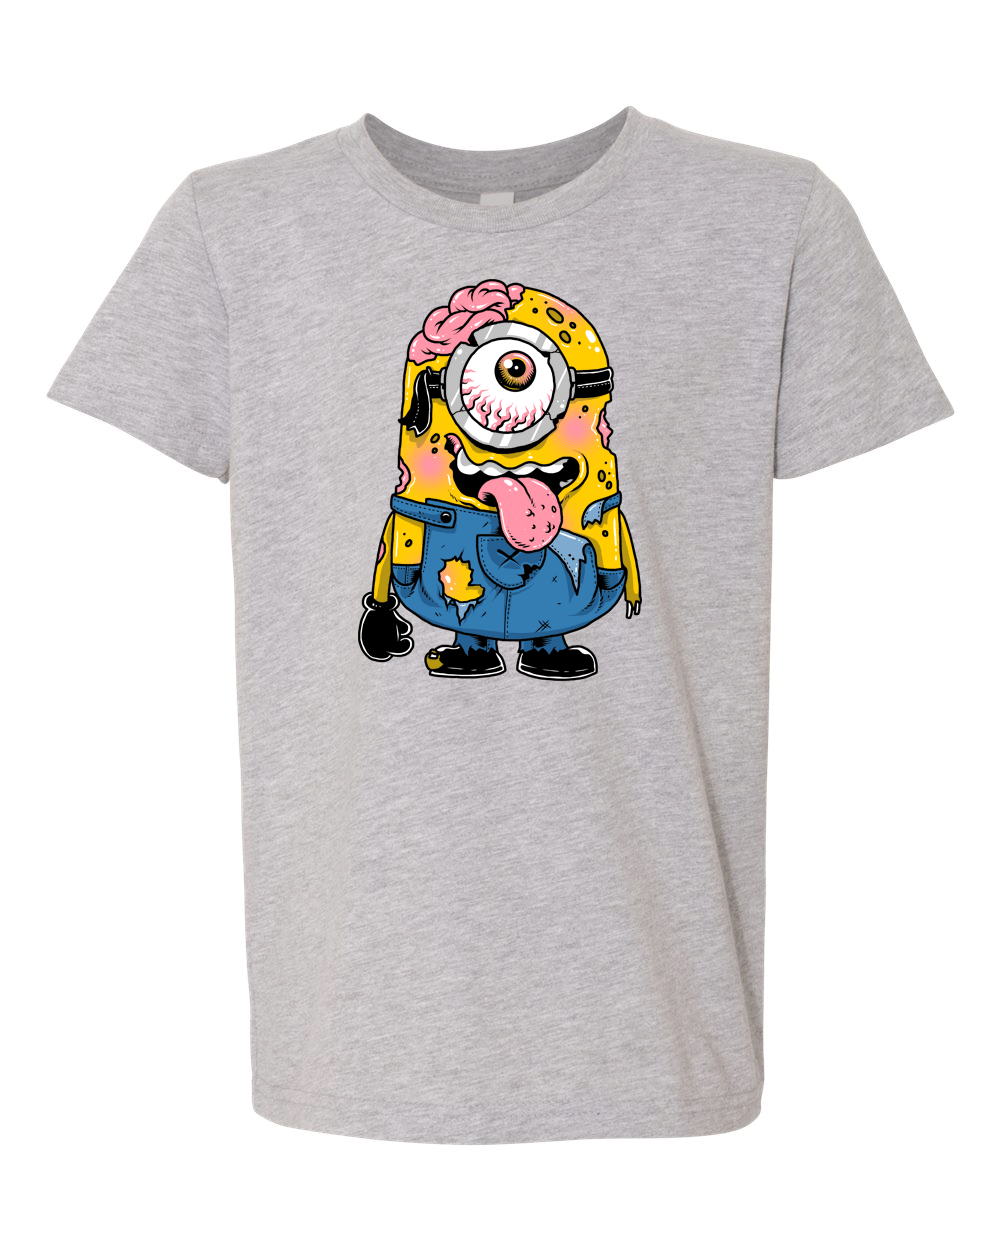 Zombie Minion - Ink That Apparel 